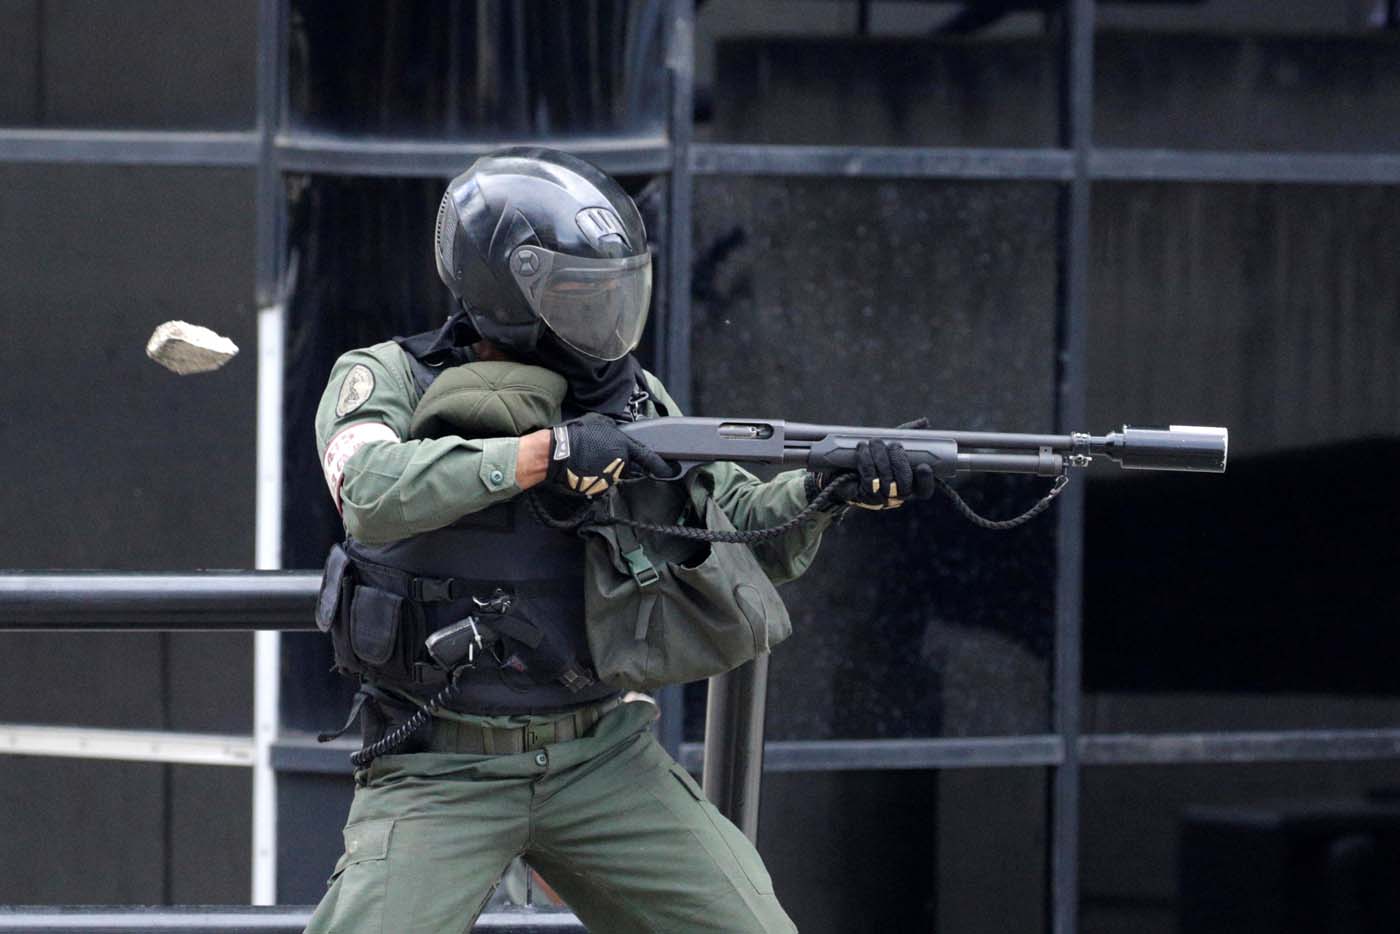 Riot police fire tear gas while clashing with opposition supporters rallying against President Nicolas Maduro in Caracas, Venezuela May 3, 2017. REUTERS/Marco Bello